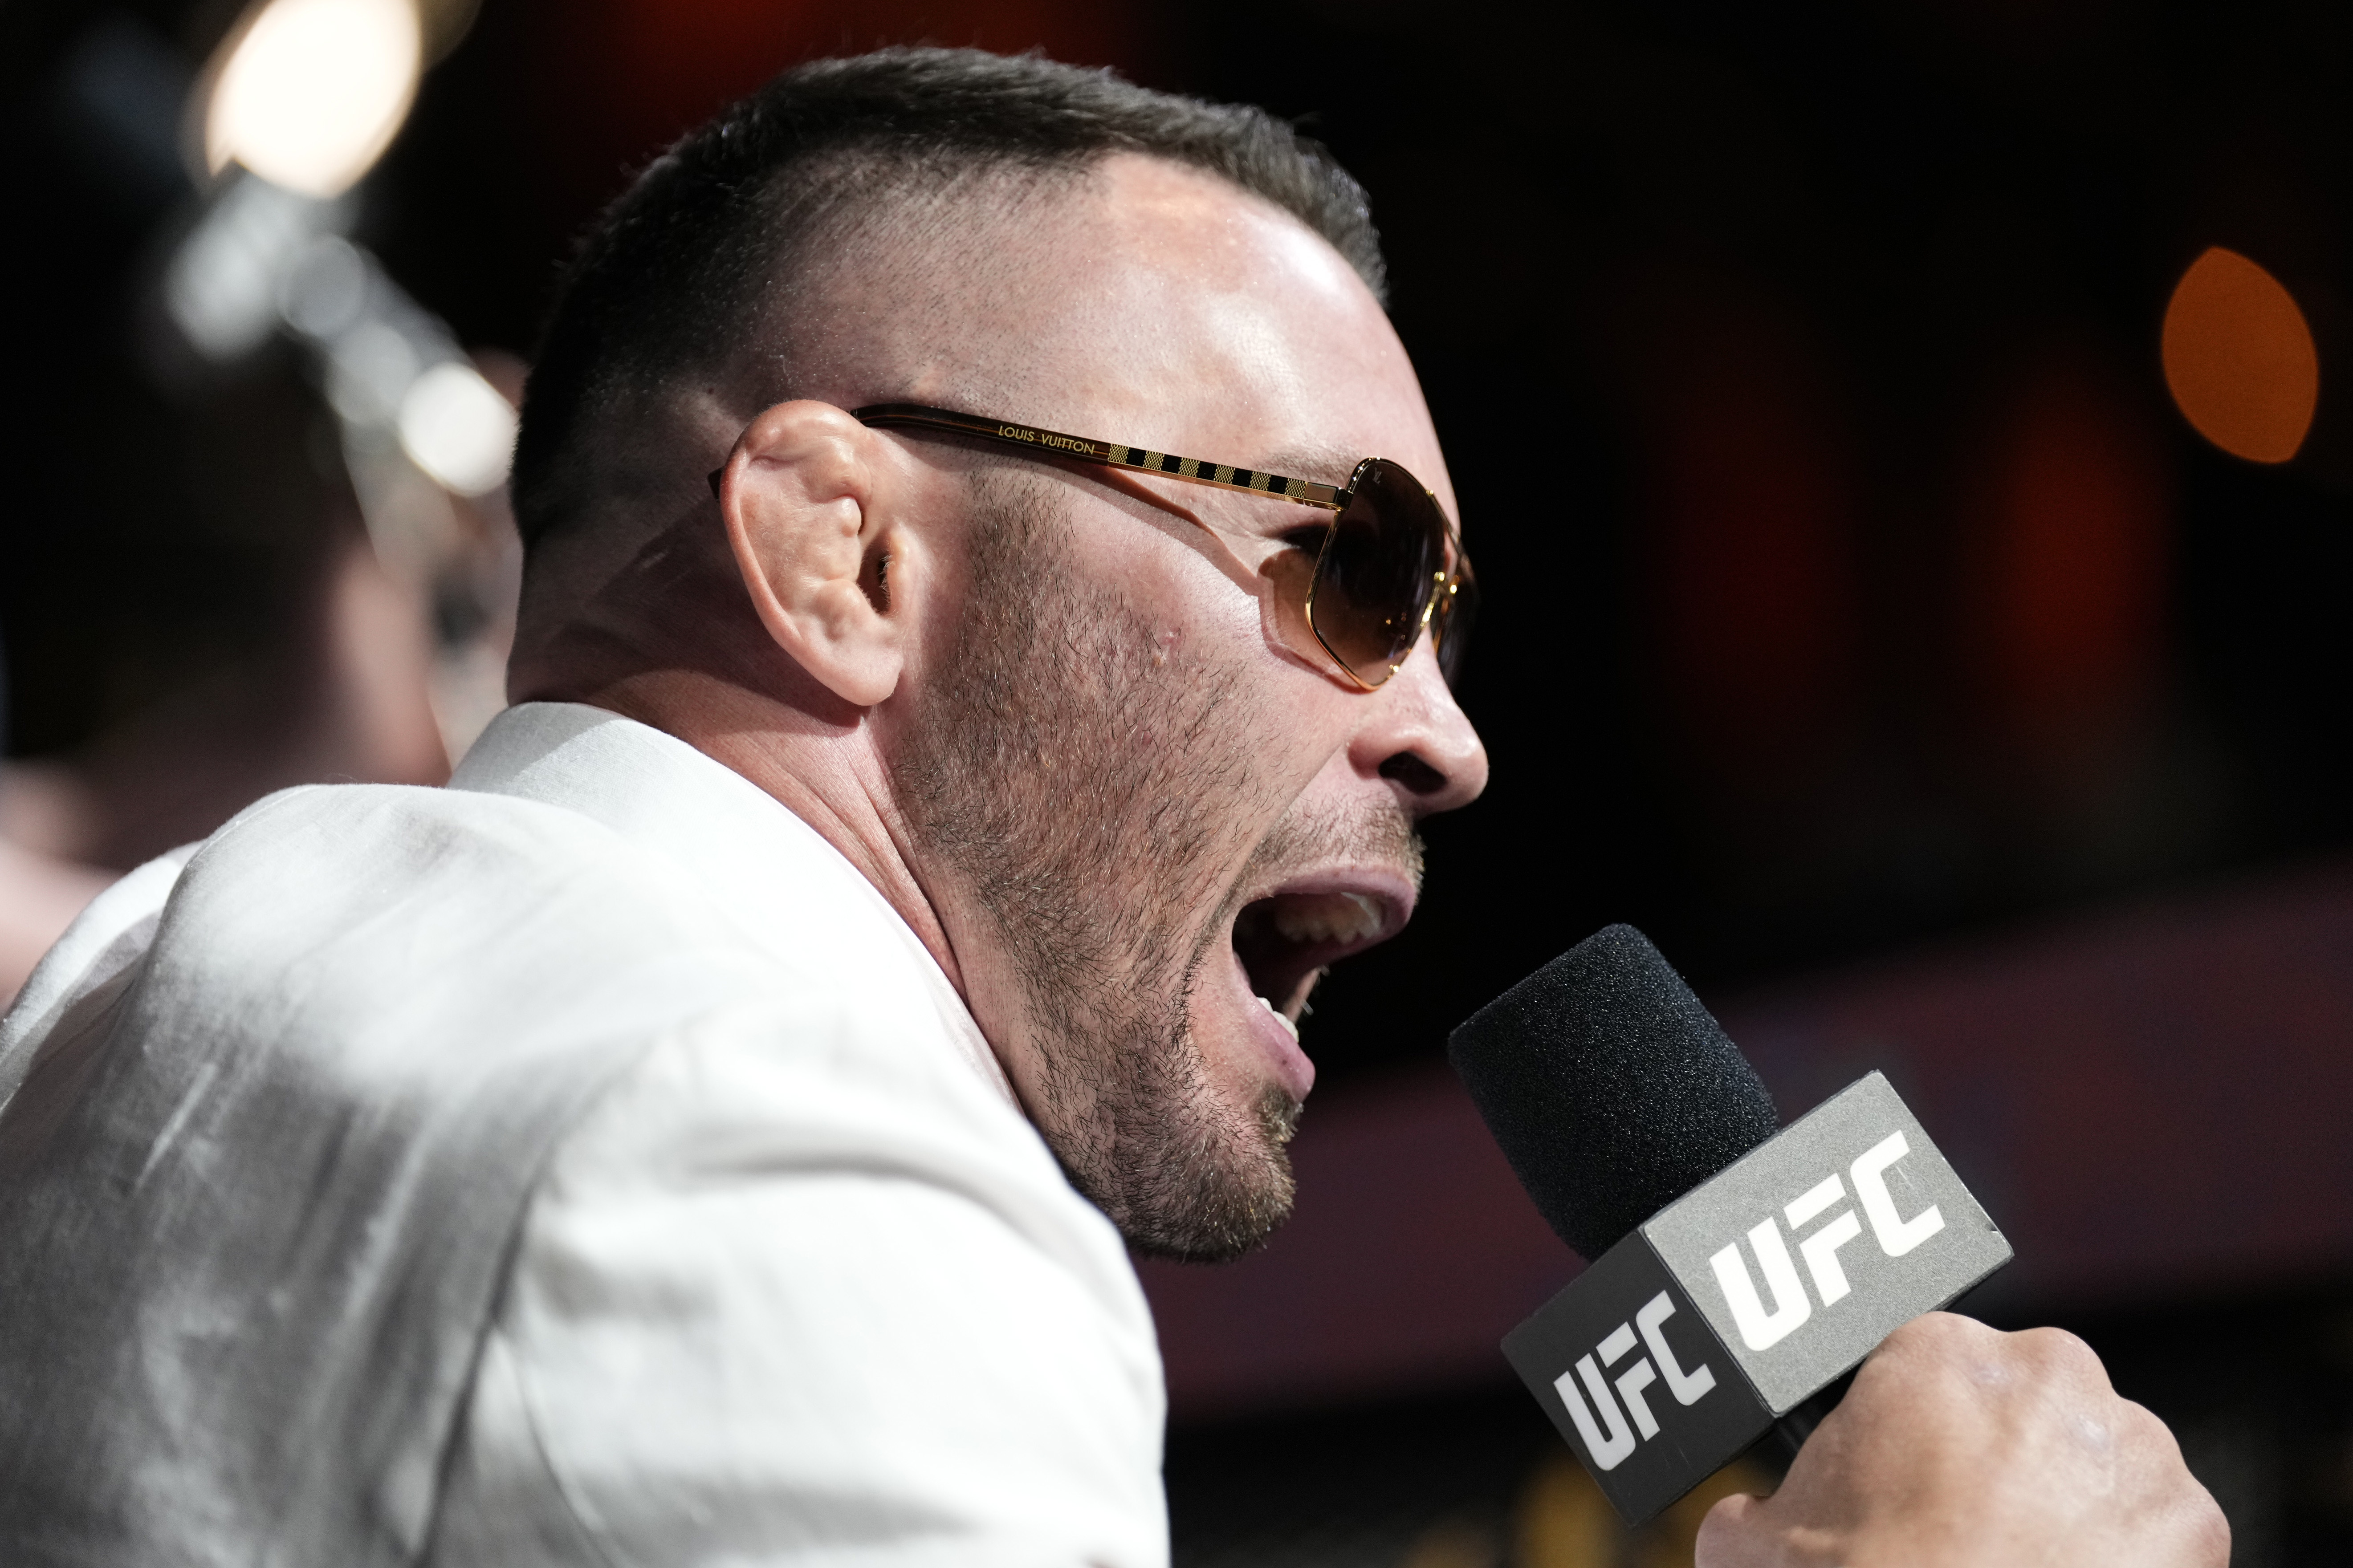 Colby Covington is favored over former friend Jorge Masvidal in the UFC 272 main event